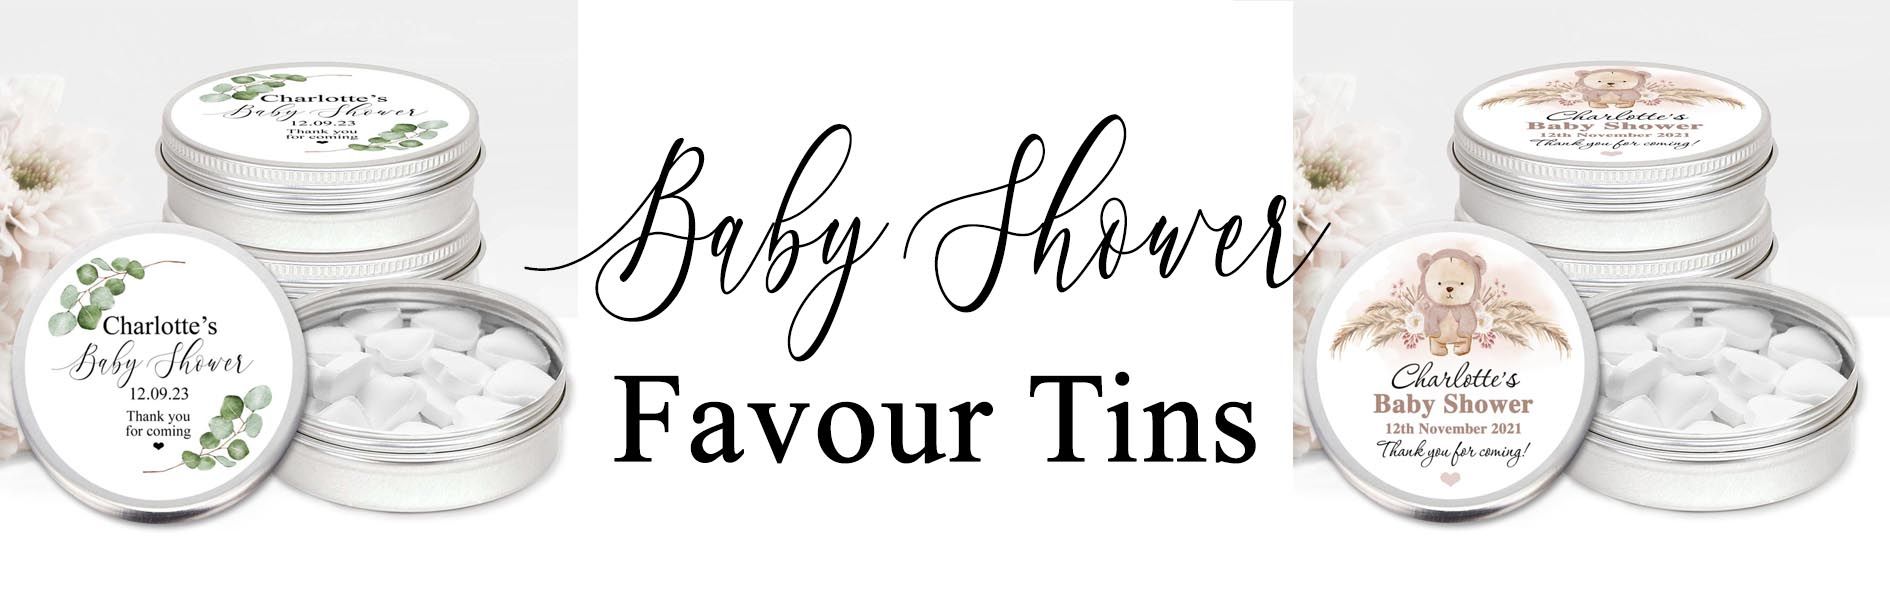 baby shower favour tins banner